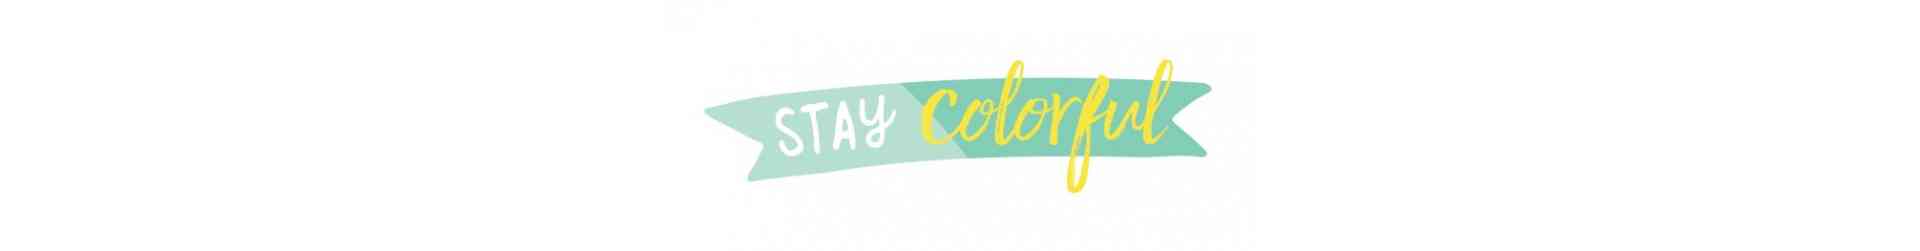 STAY COLORFUL - Dear Lizzy